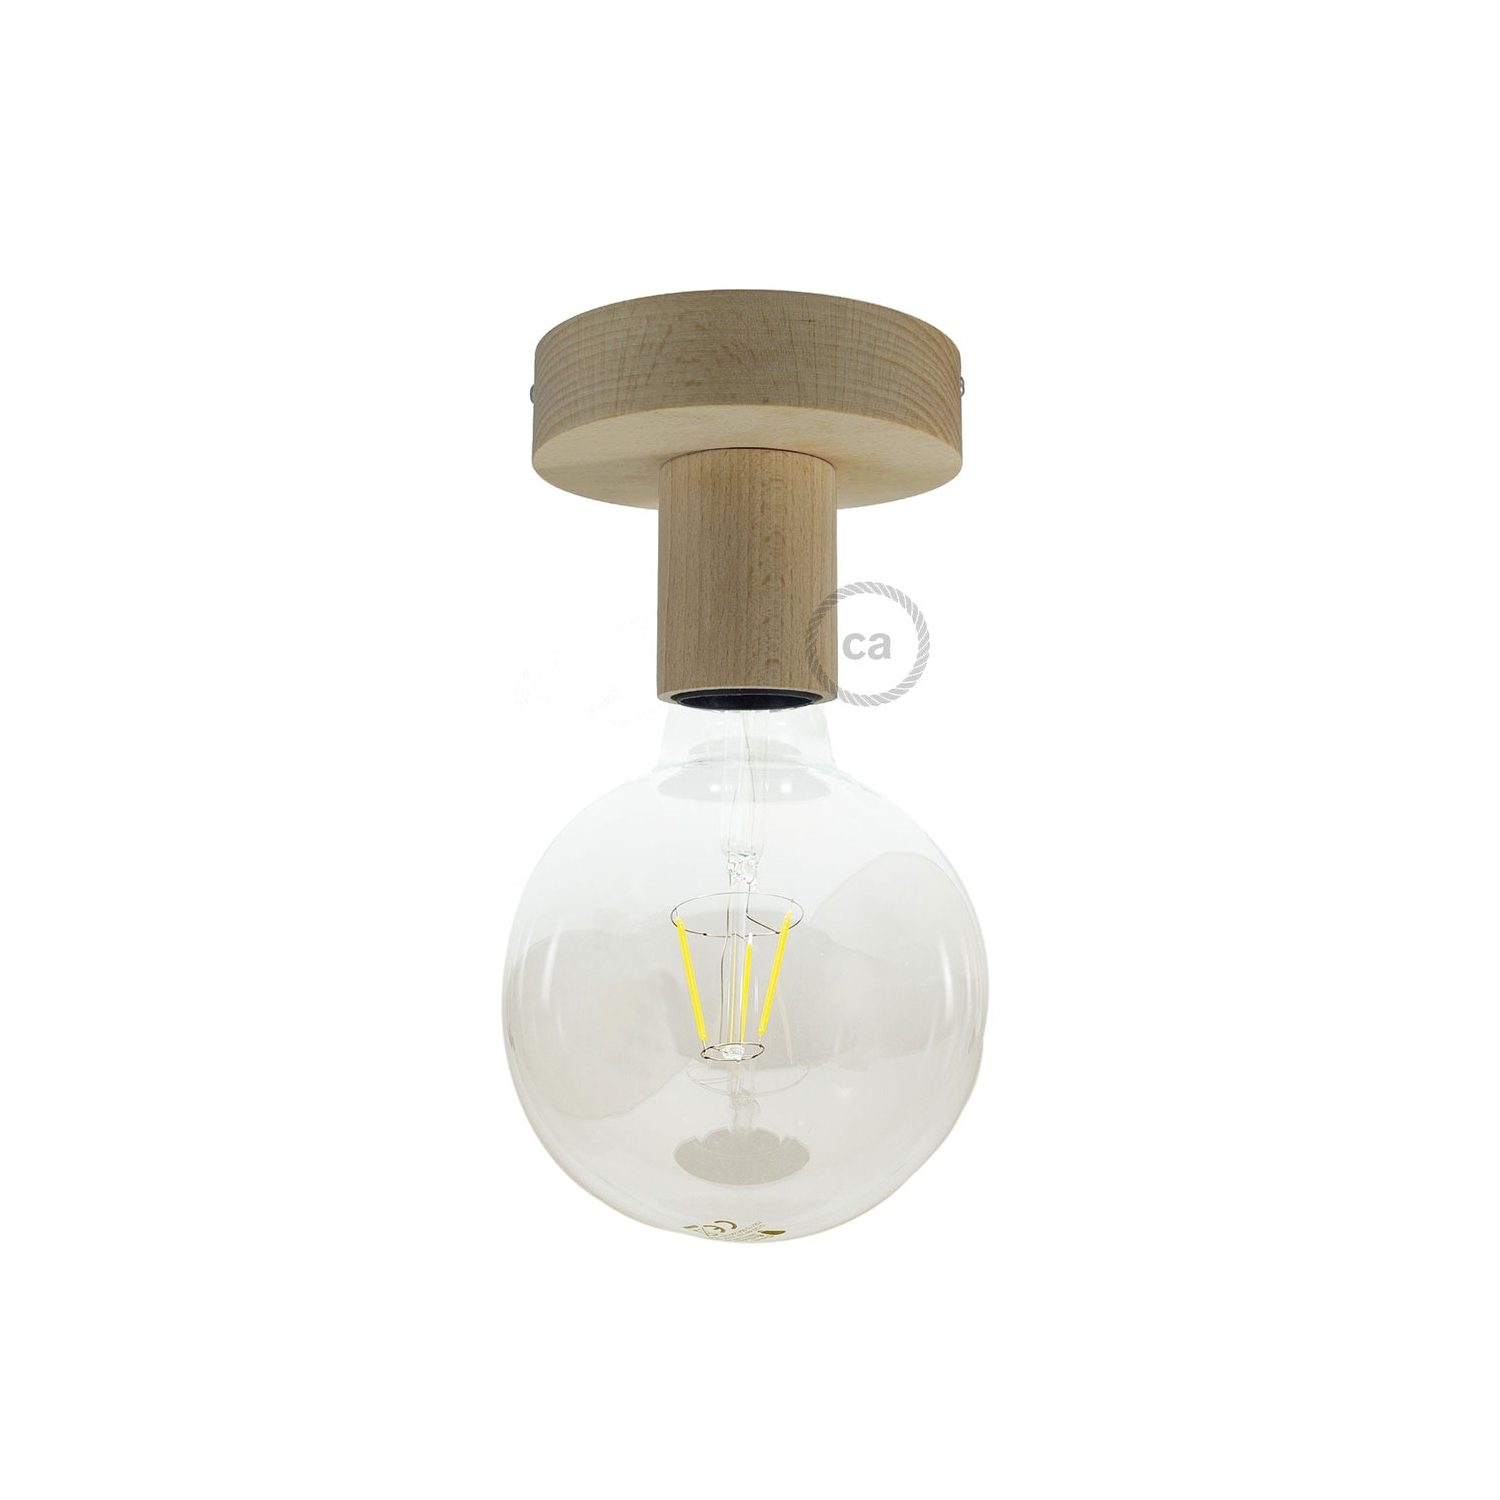 Natural Fermaluce, the natural wood flush light for your wall or ceiling, 3.8".